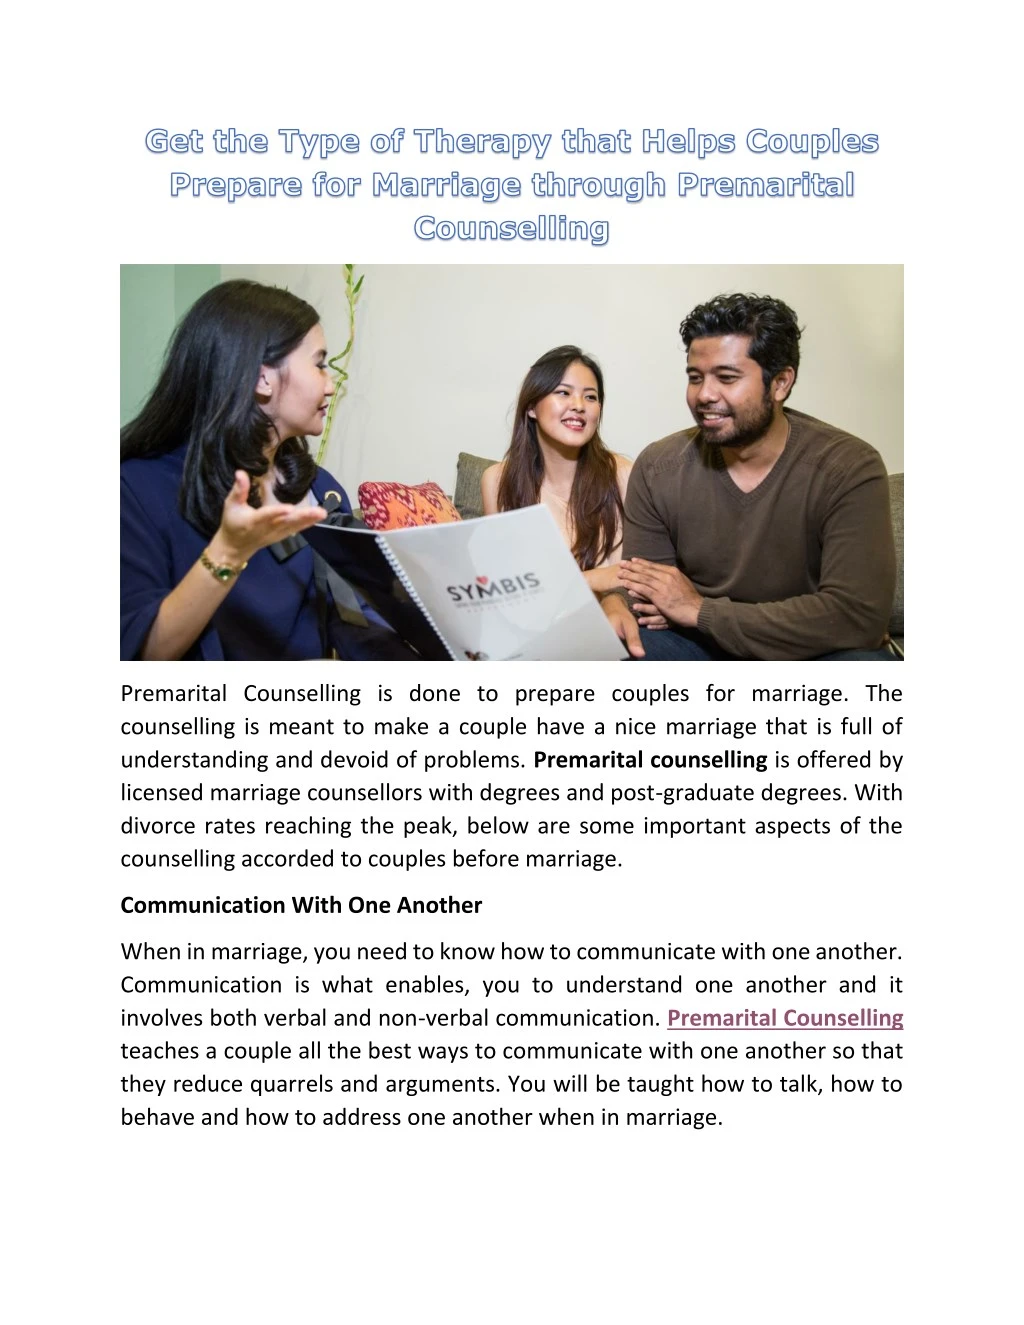 premarital counselling is done to prepare couples